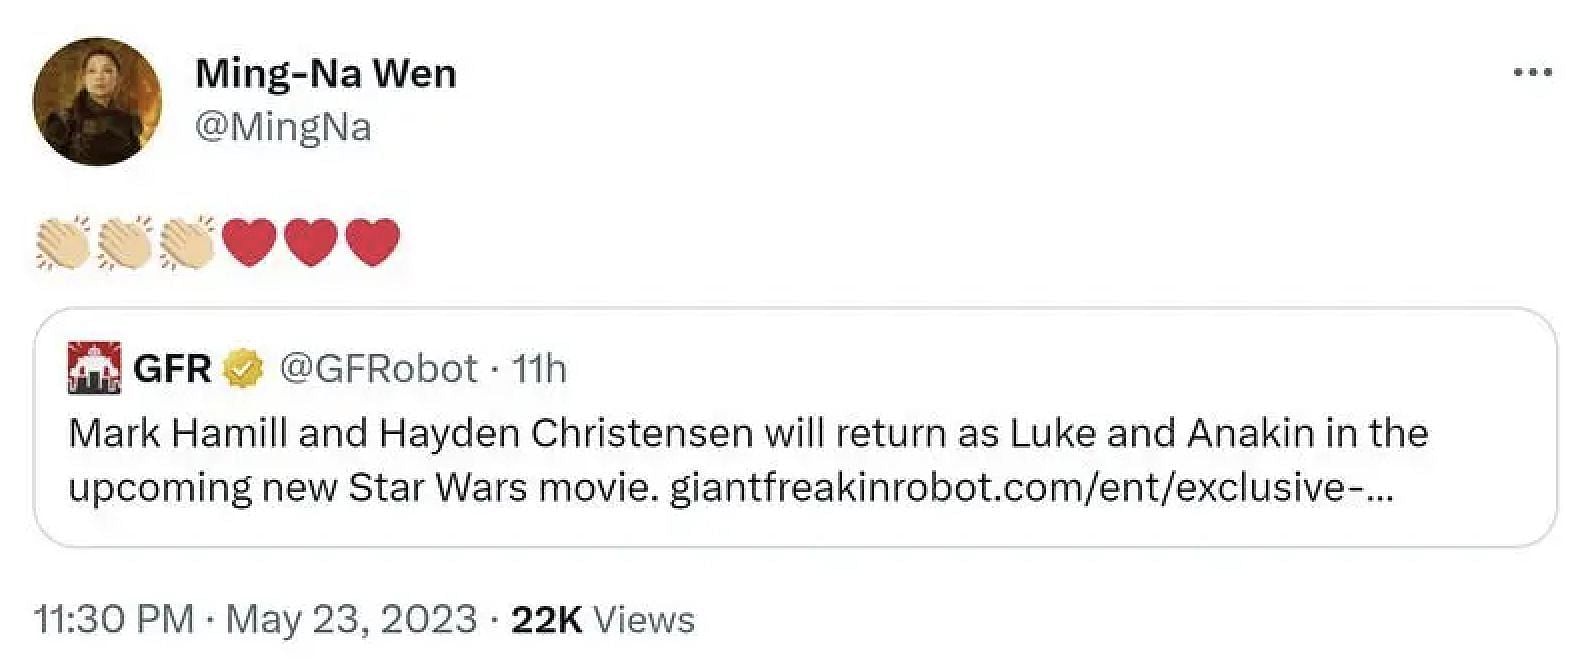 Ming-Na Wen sends her congratulations to Mark Hamill amidst rumors of his return as Luke Skywalker in the highly-anticipated 2025 Star Wars film (Image via Ming-Na Wen&#039;s Twitter)